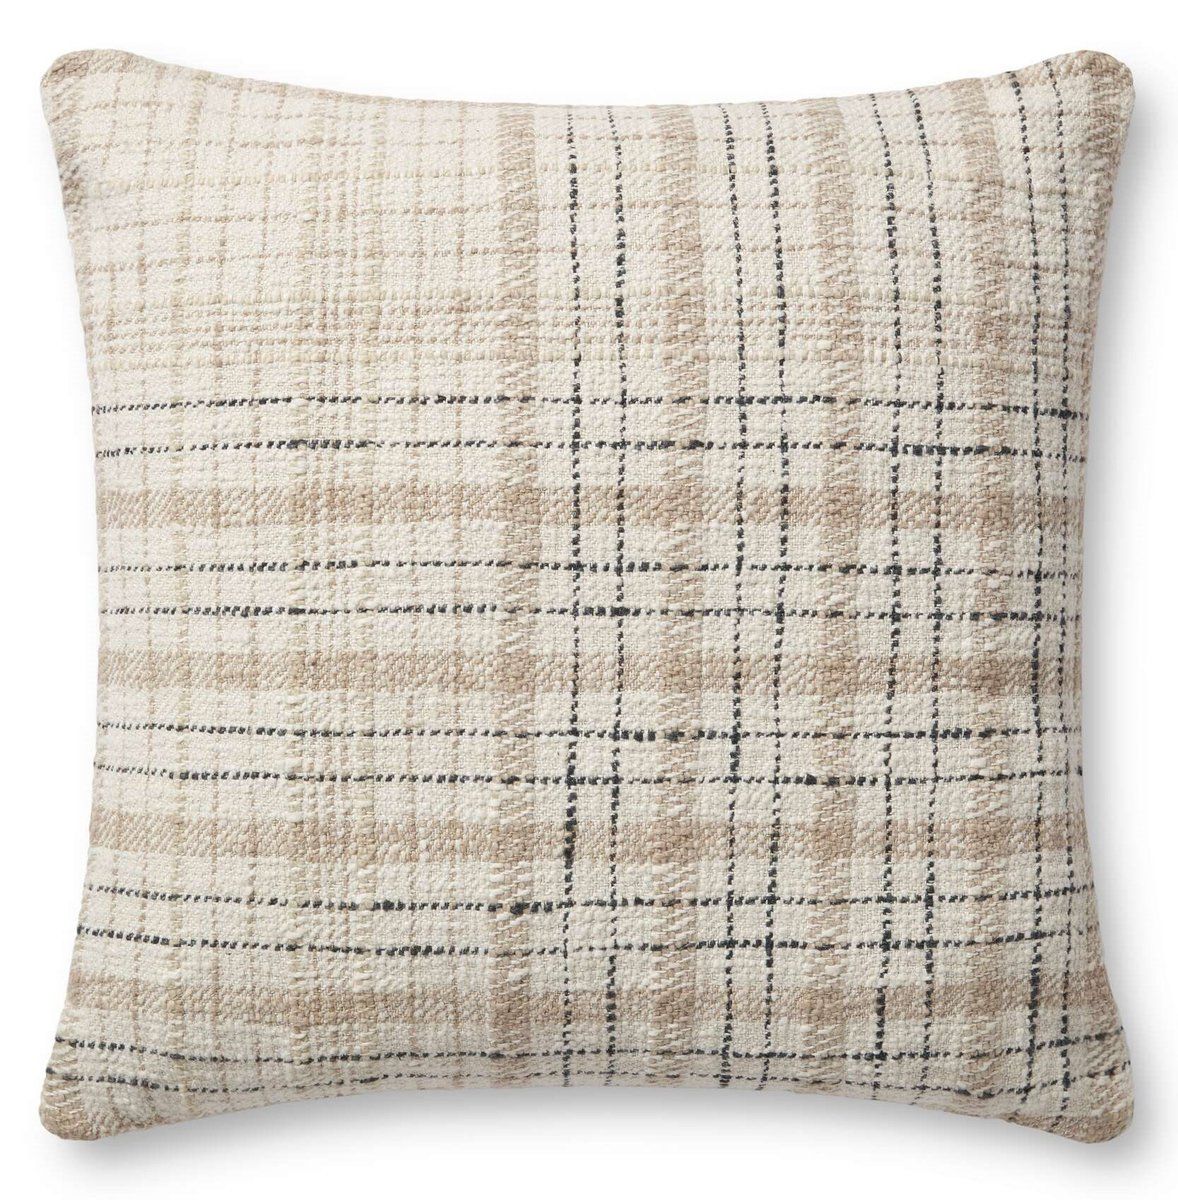 Cricket Pillow - PCJ-0013 | Rugs Direct